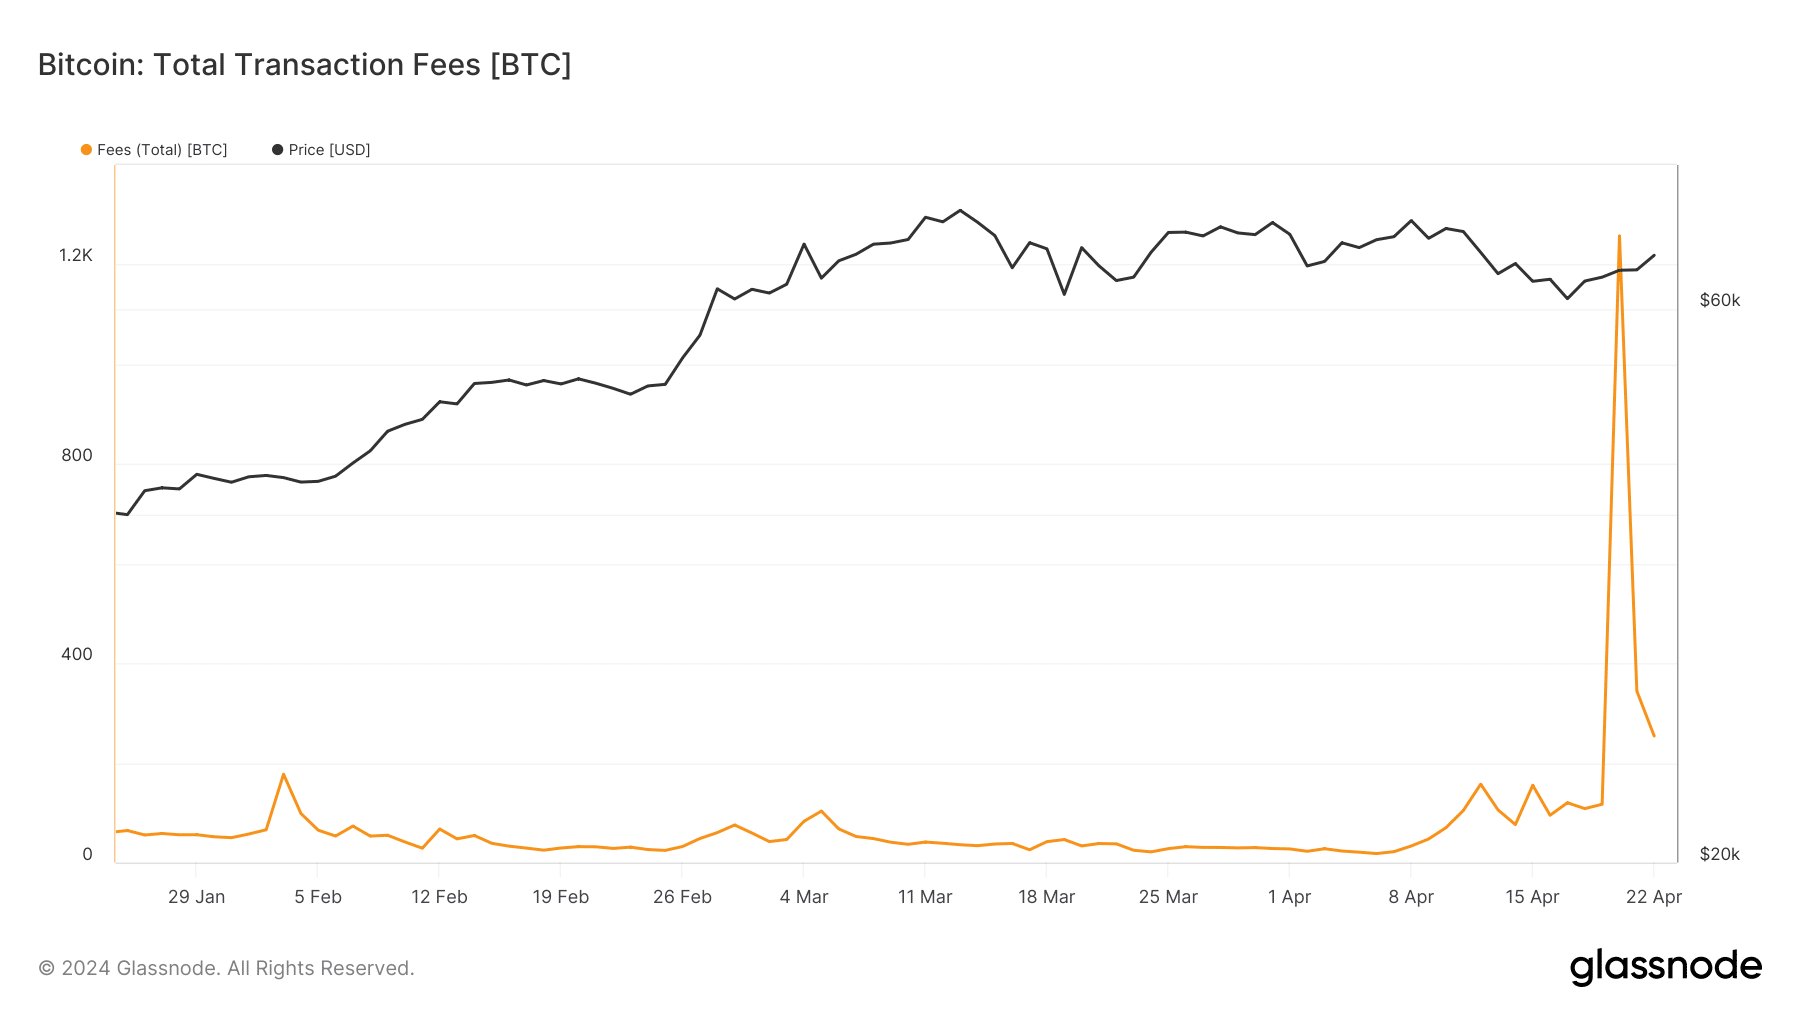 Bitcoin costs crashed after previously skyrocketing